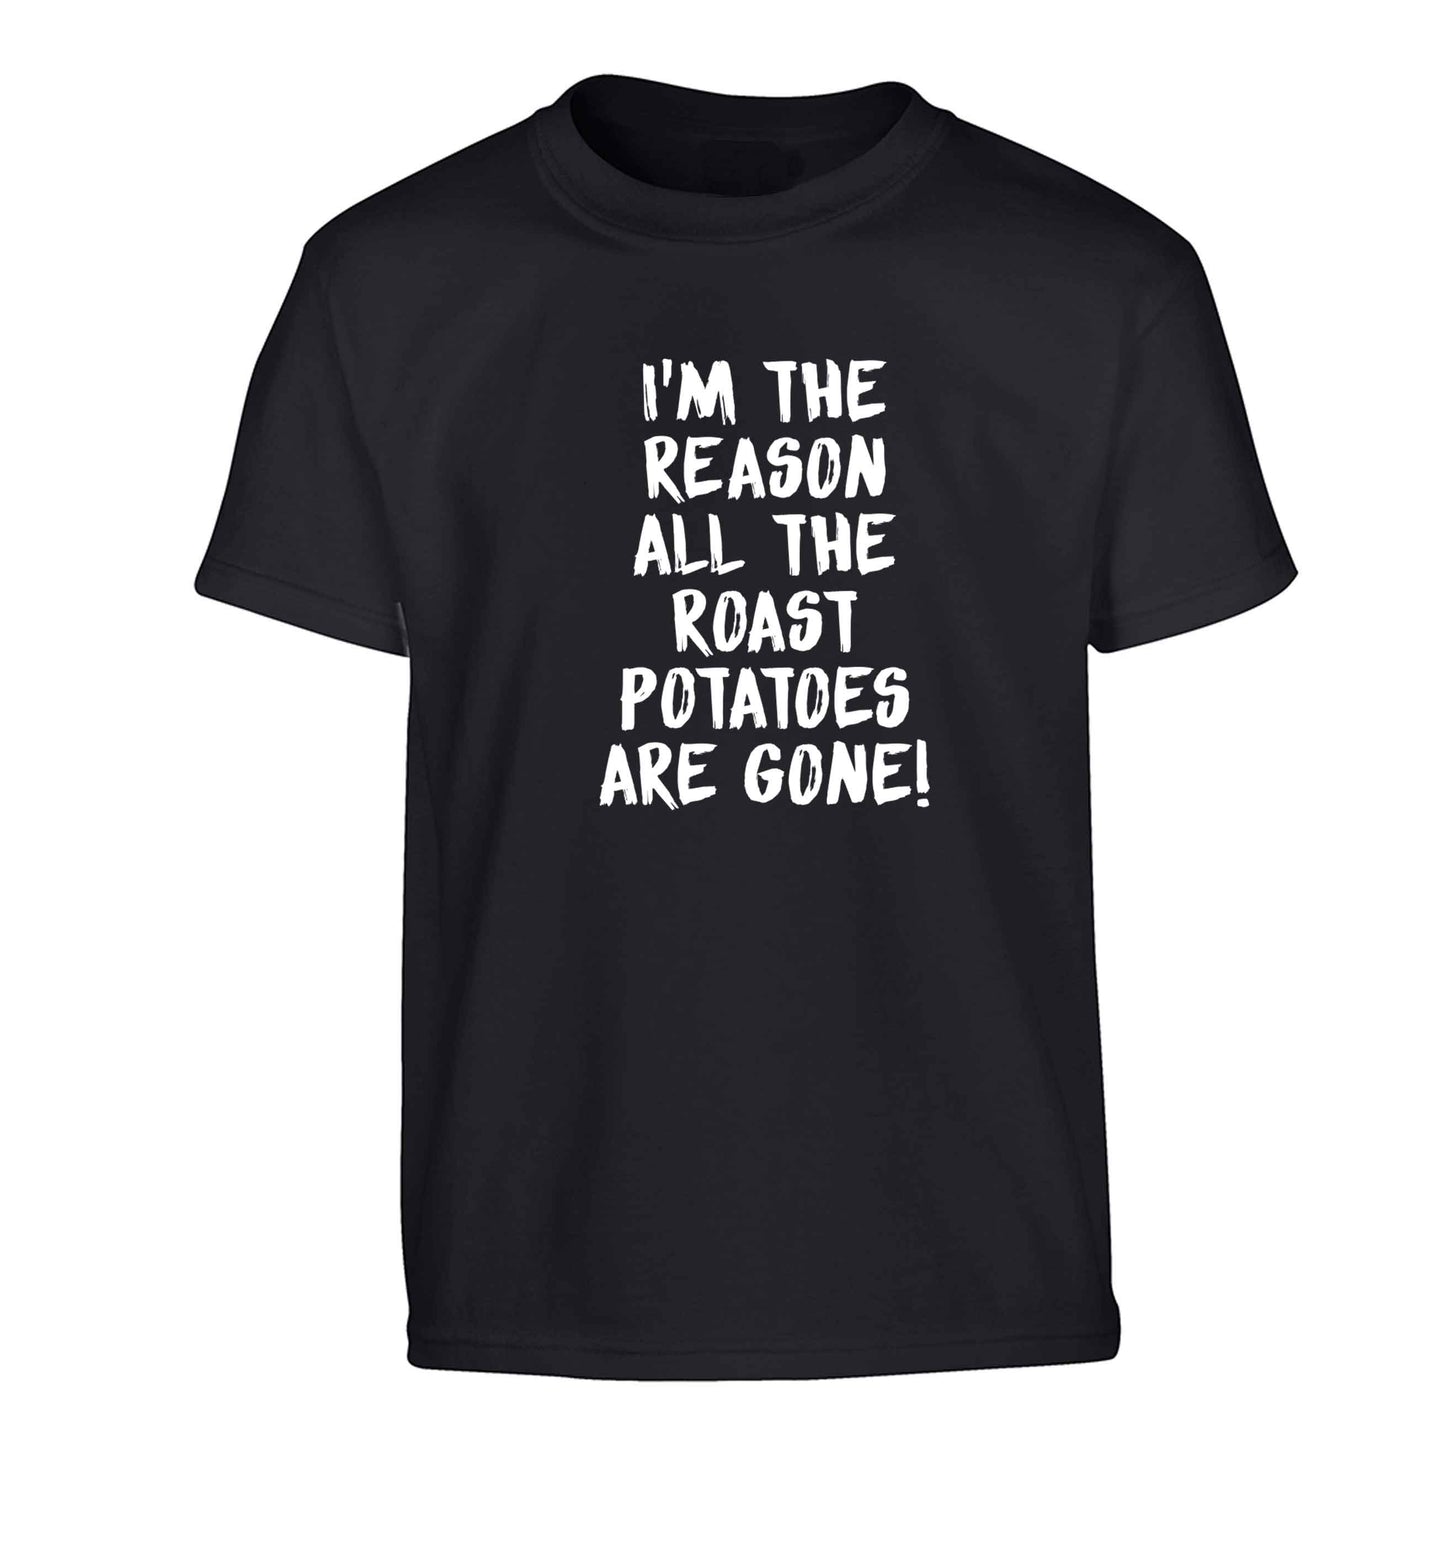 I'm the reason all the roast potatoes are gone Children's black Tshirt 12-13 Years